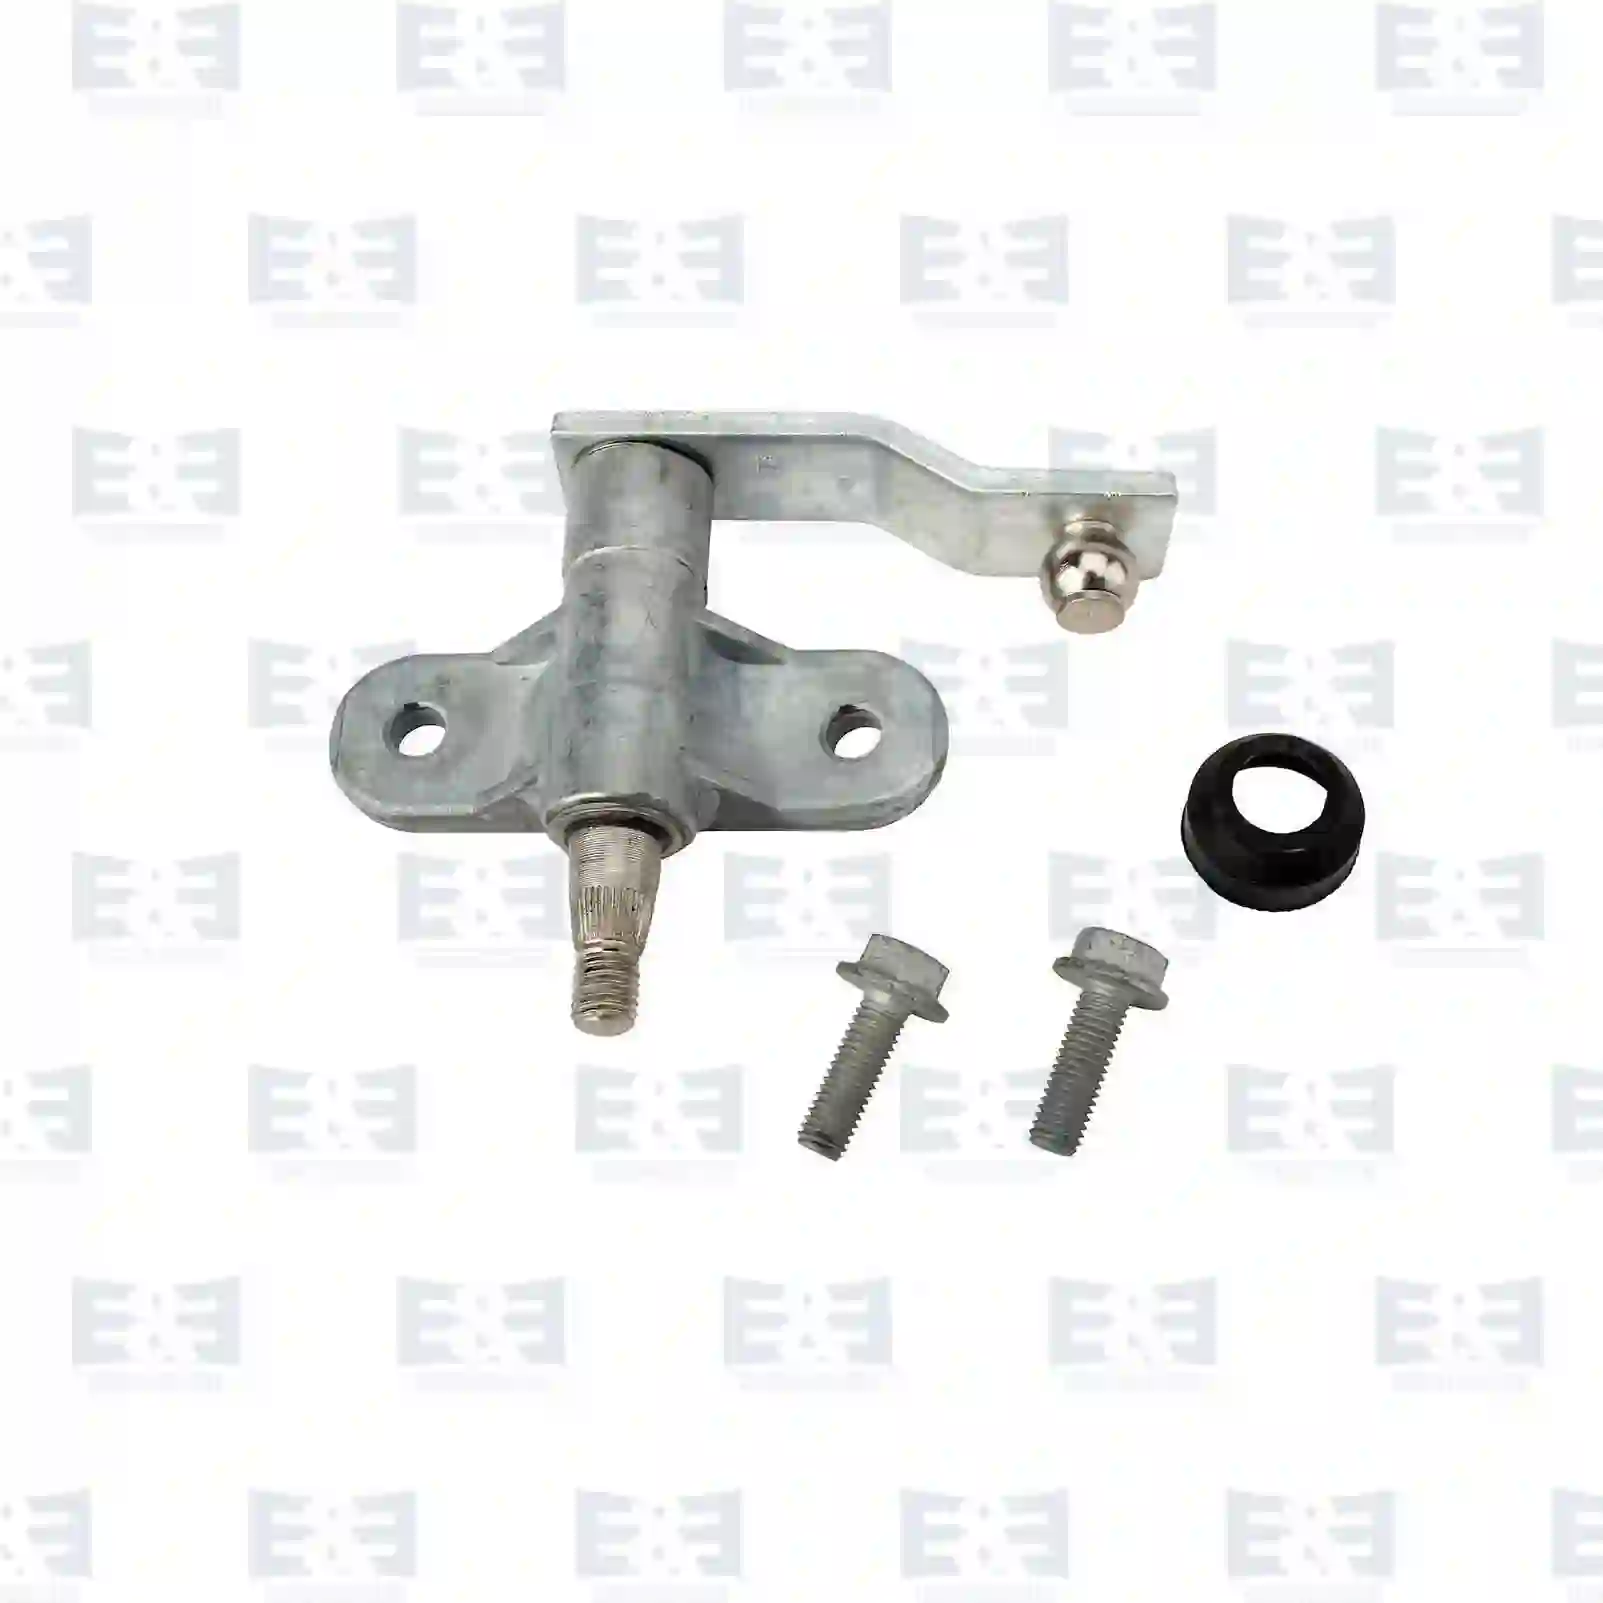  Wiper arm bearing || E&E Truck Spare Parts | Truck Spare Parts, Auotomotive Spare Parts